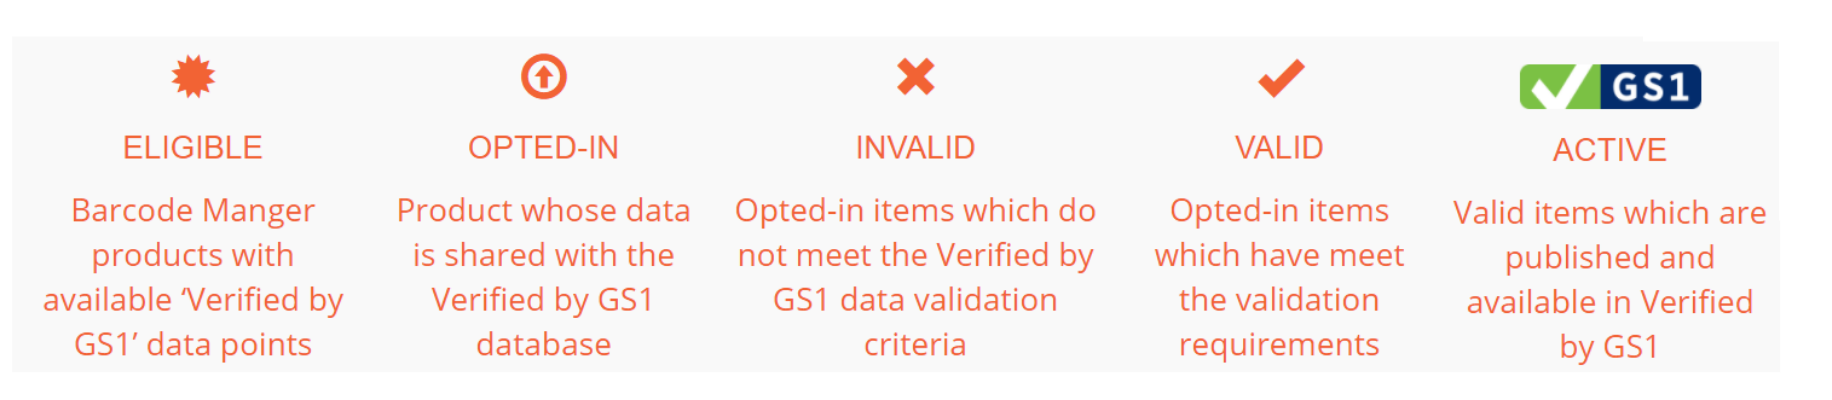 Verified by GS1 Data Validation Process Icons